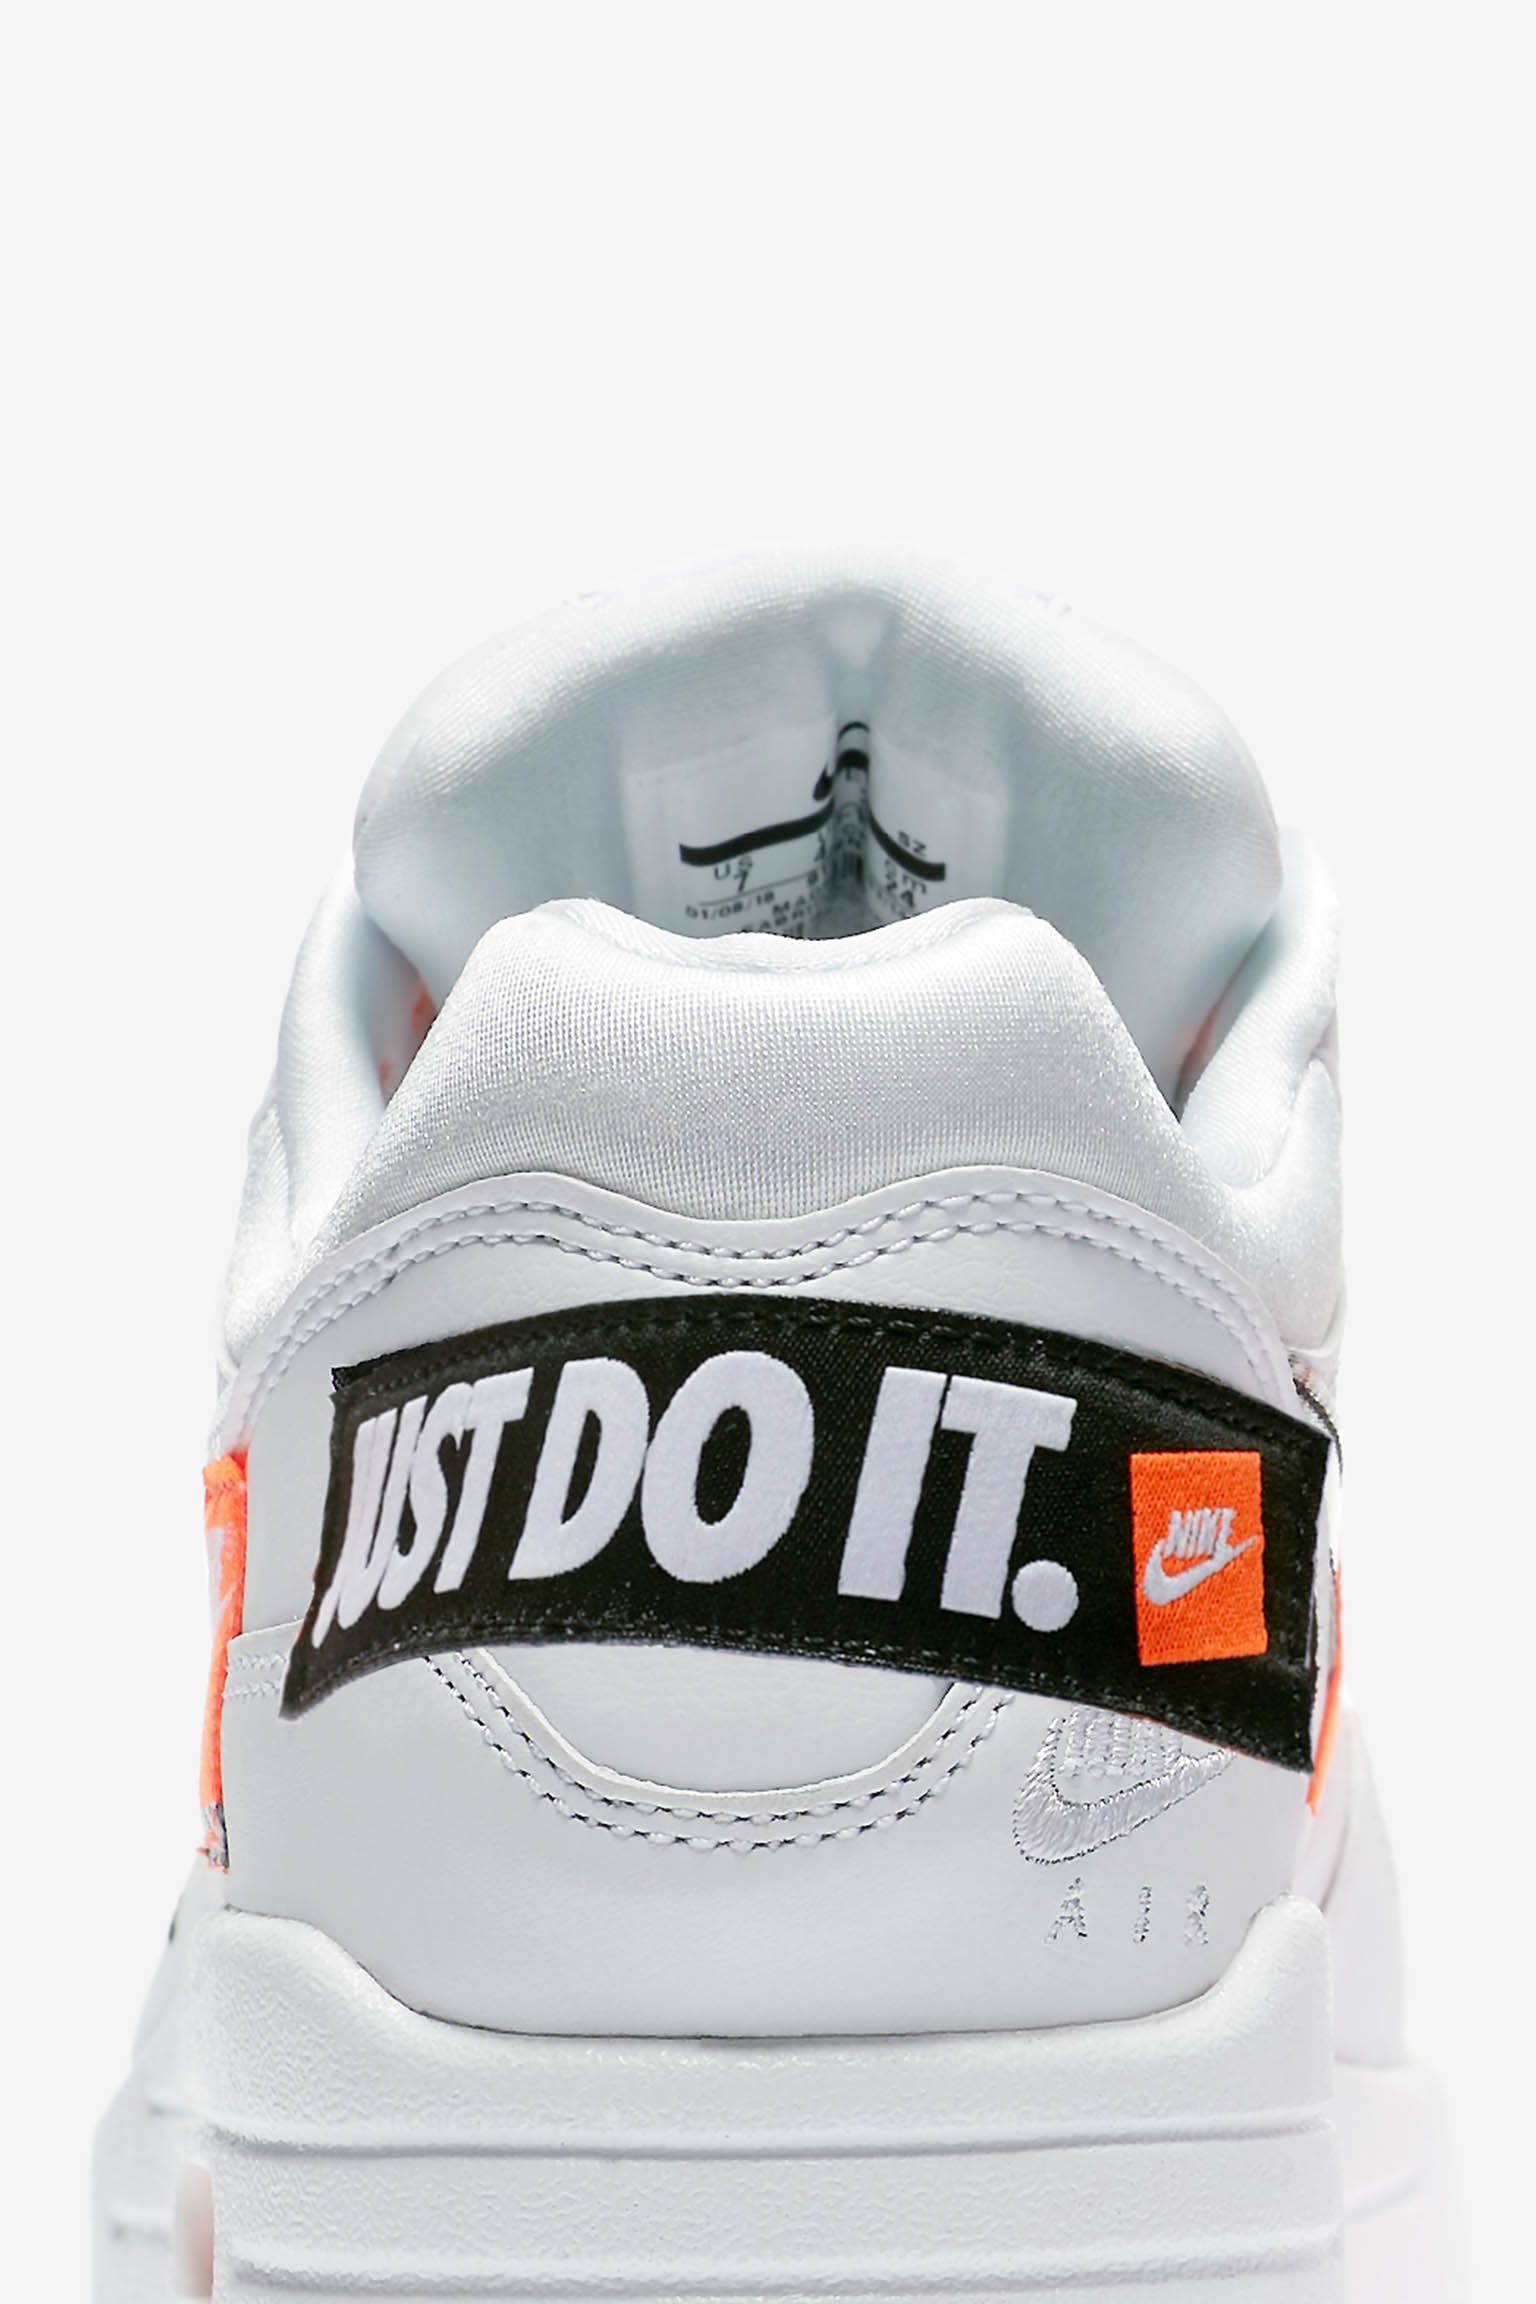 nike air just do it shoes